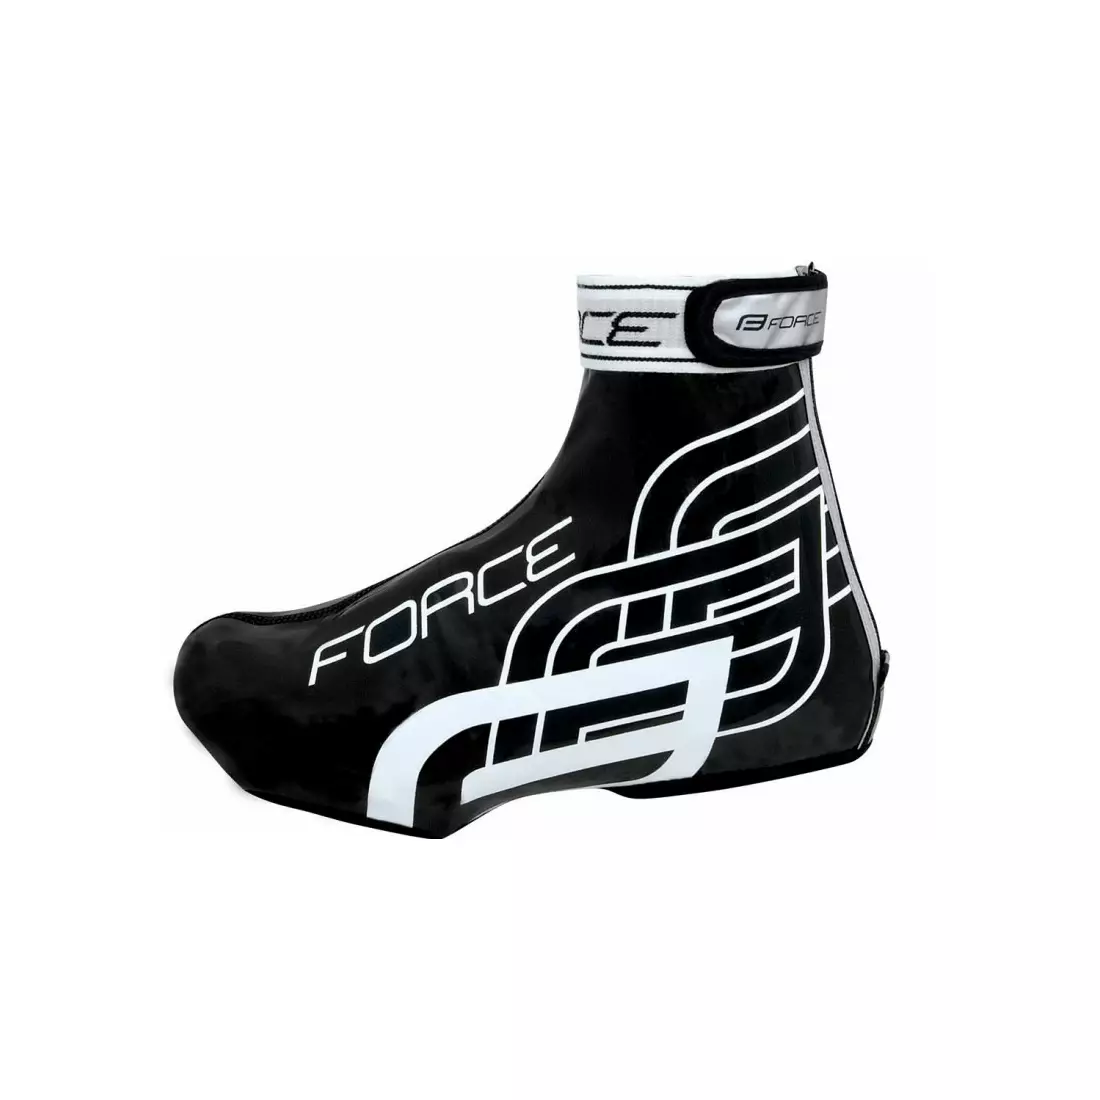 FORCE RAINY rain covers for cycling shoes 90604